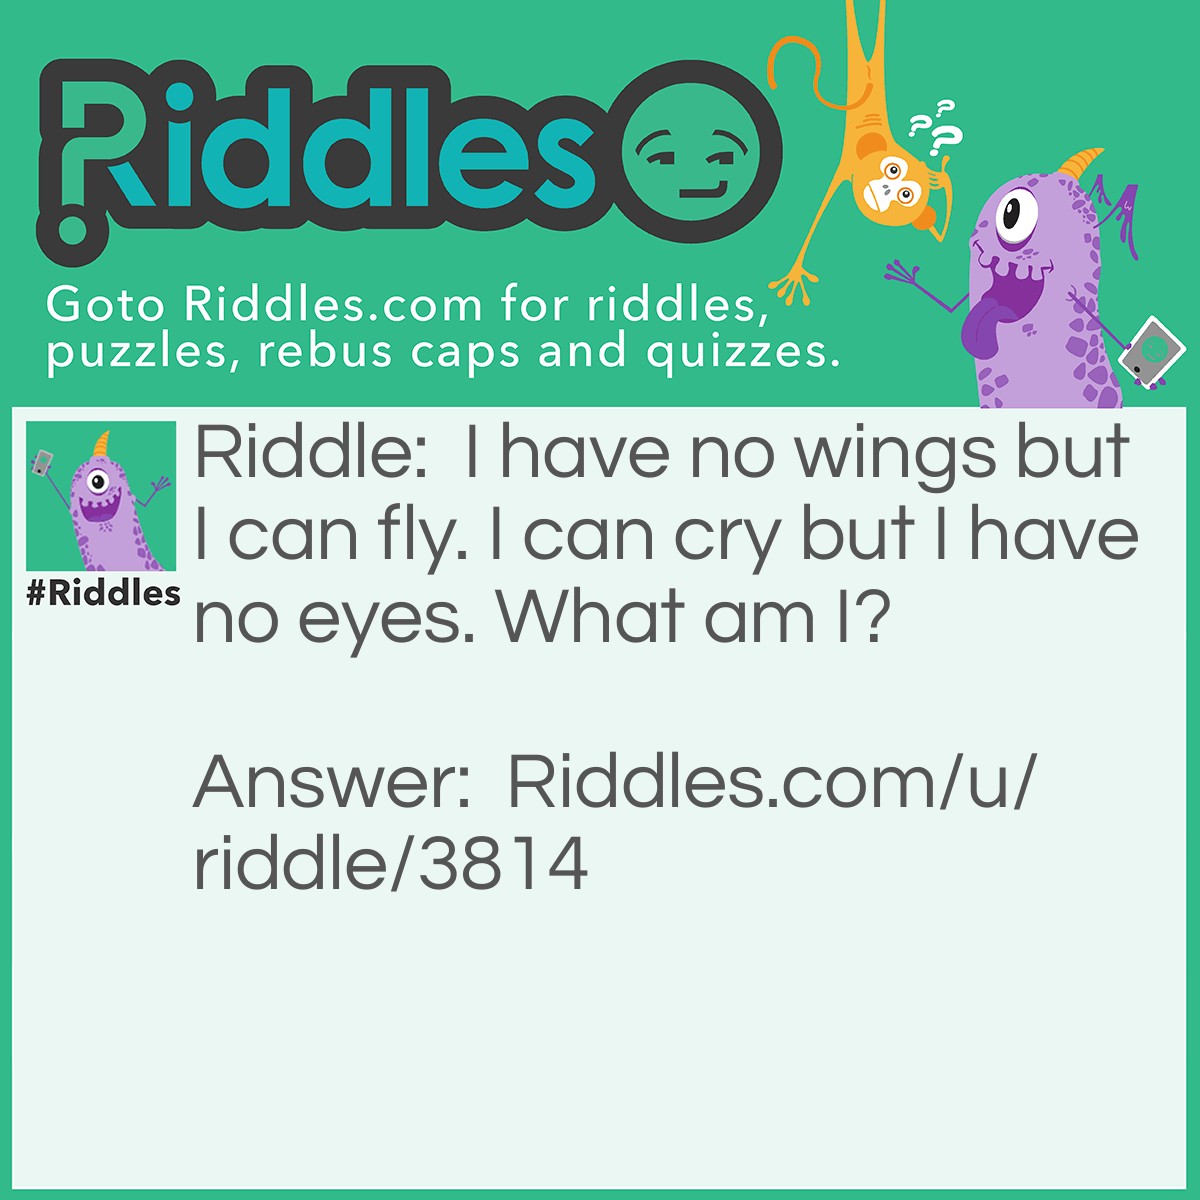 Riddle: I have no wings but I can fly. I can cry but I have no eyes. What am I? Answer: I am a cloud.